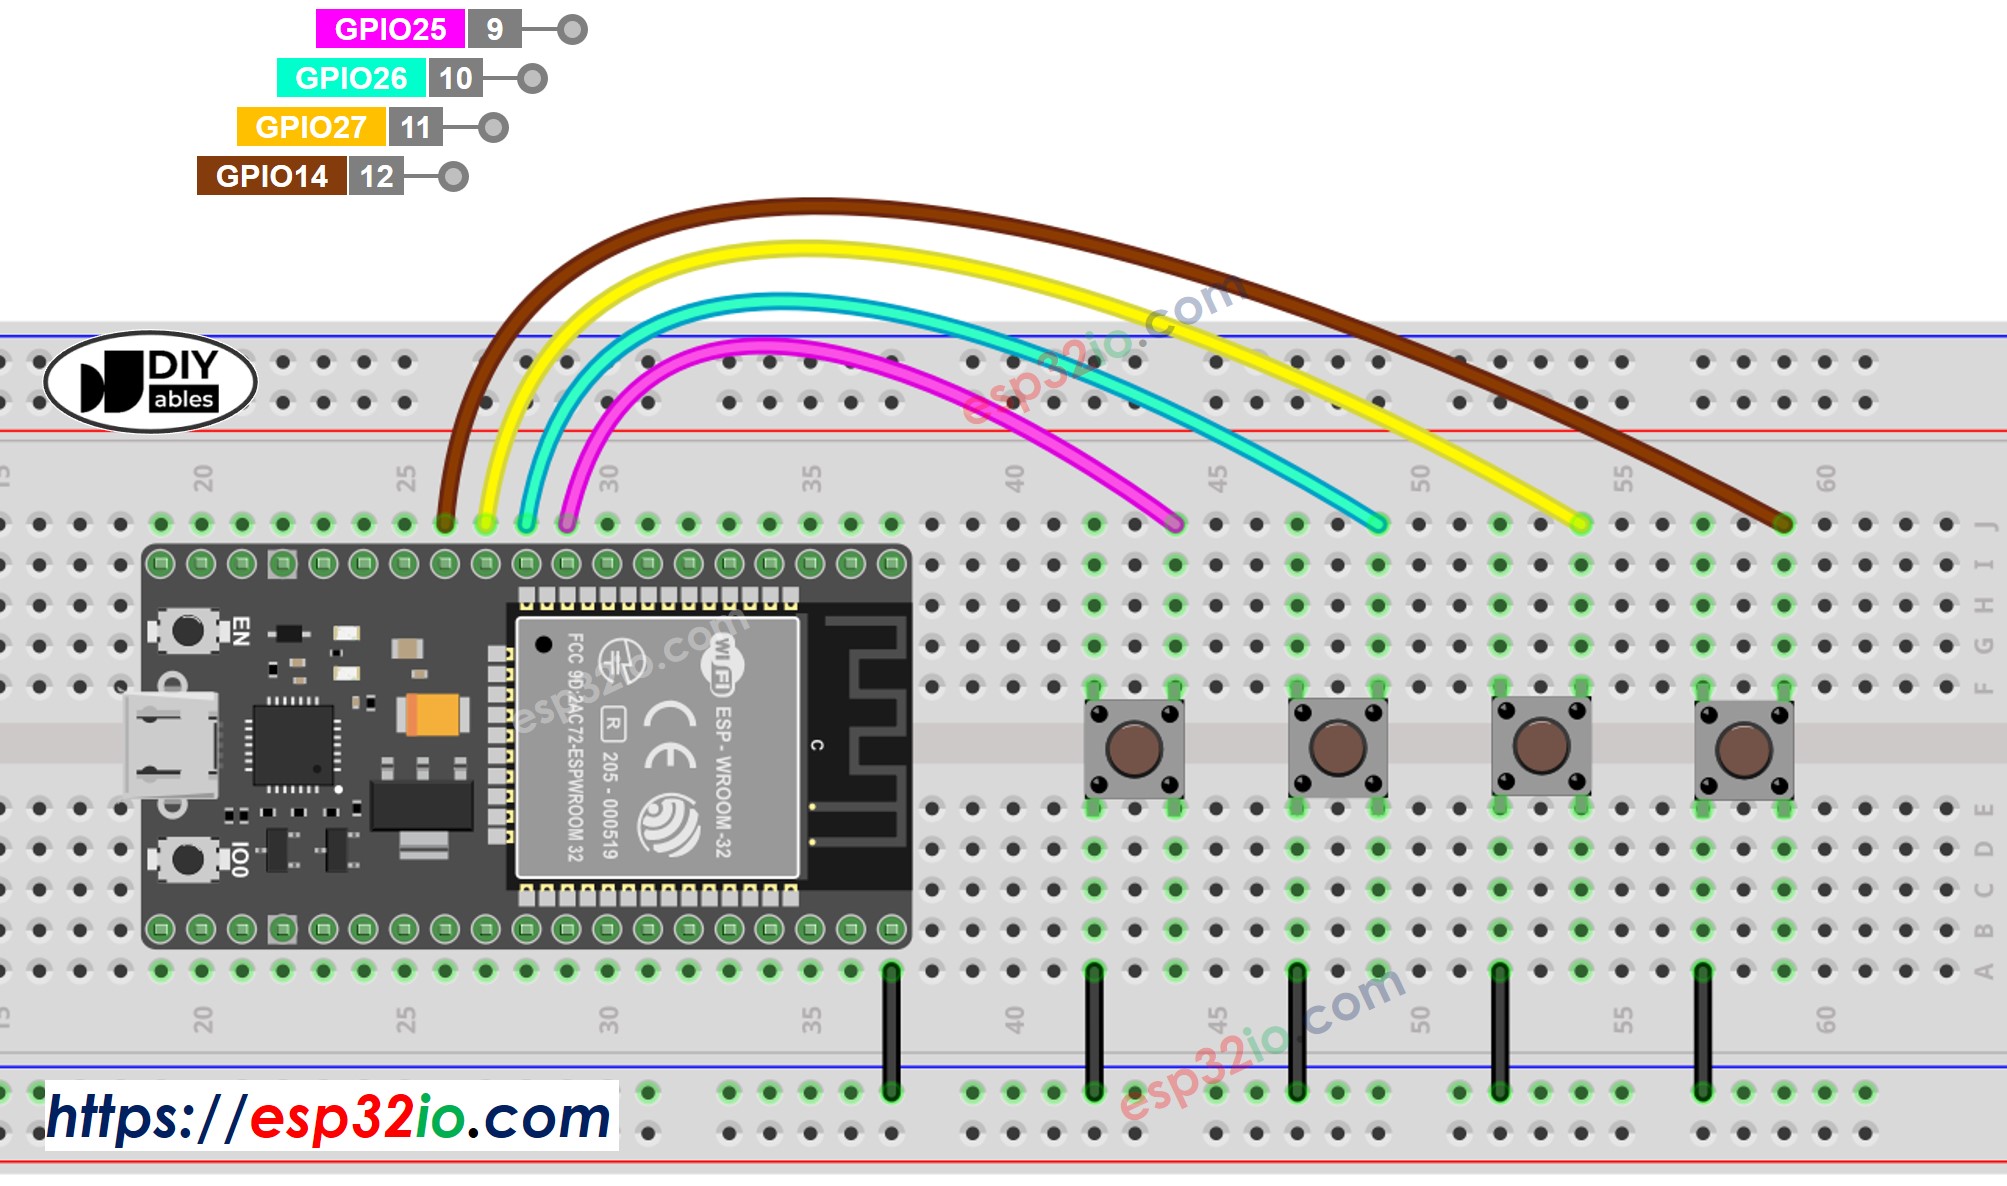 ESP32 multiple buttons Wiring Diagram